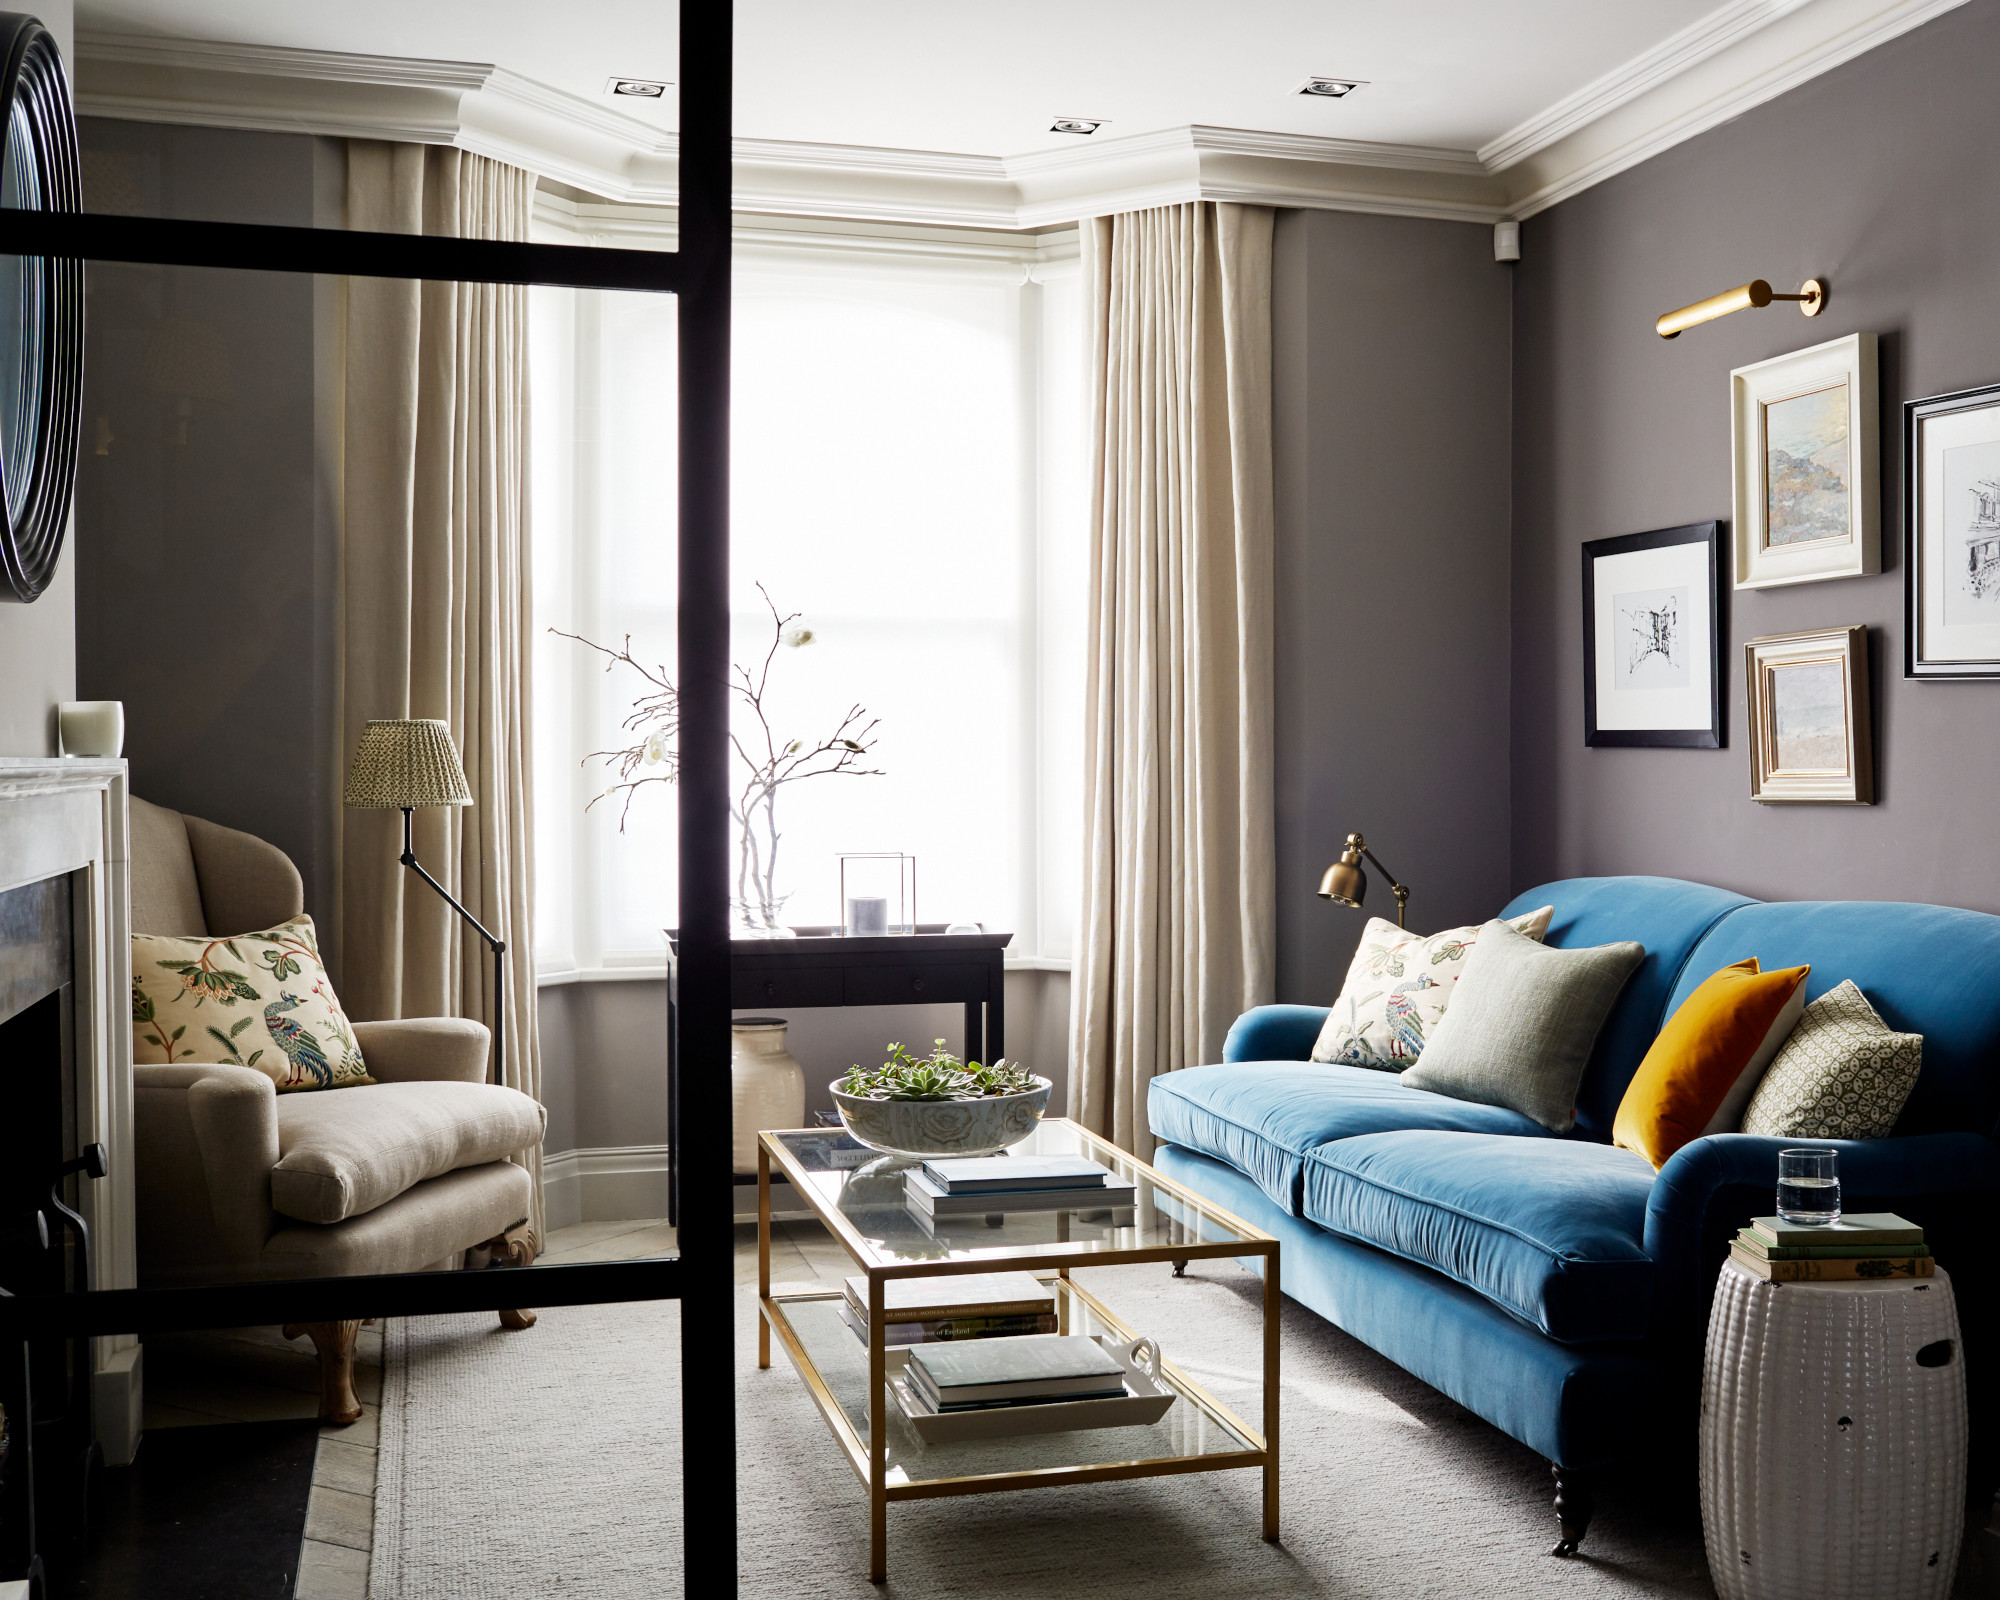 How Long Should Curtains Be The Golden Rules From Experts